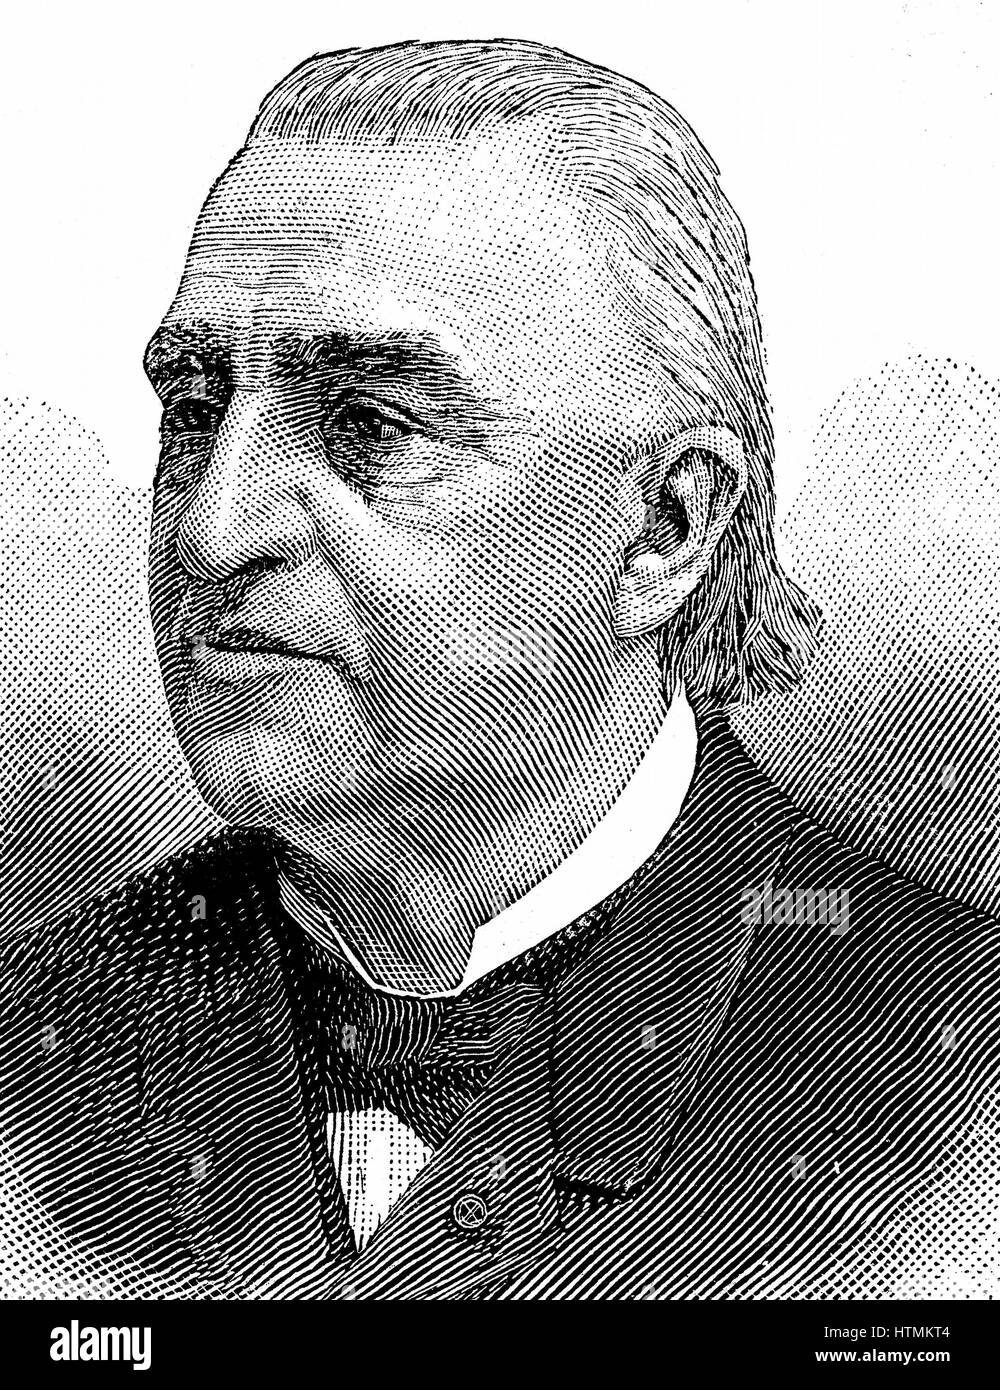 Jean Martin CHARCOT (1825-1903) French neurologist and pathologist. Studied hypnotism. Worked at Salpetriere, Paris from 1862. Freud amongst his pupils. Engraving, 1893 Stock Photo